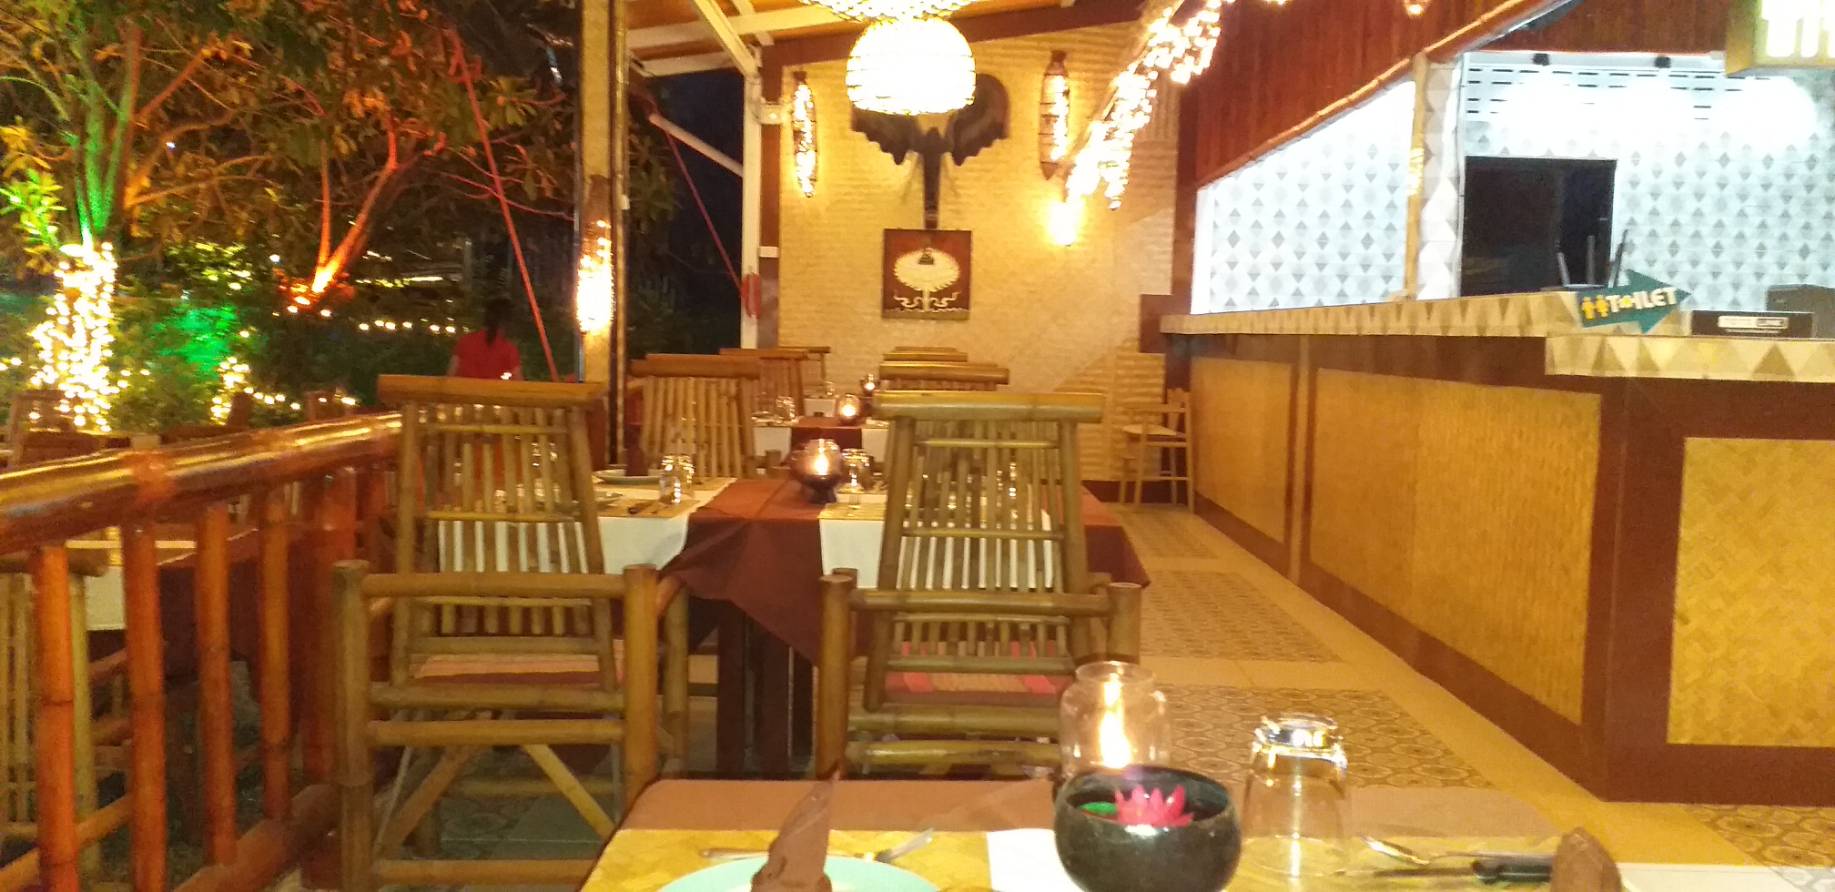 Niang Restaurant and Land (2)